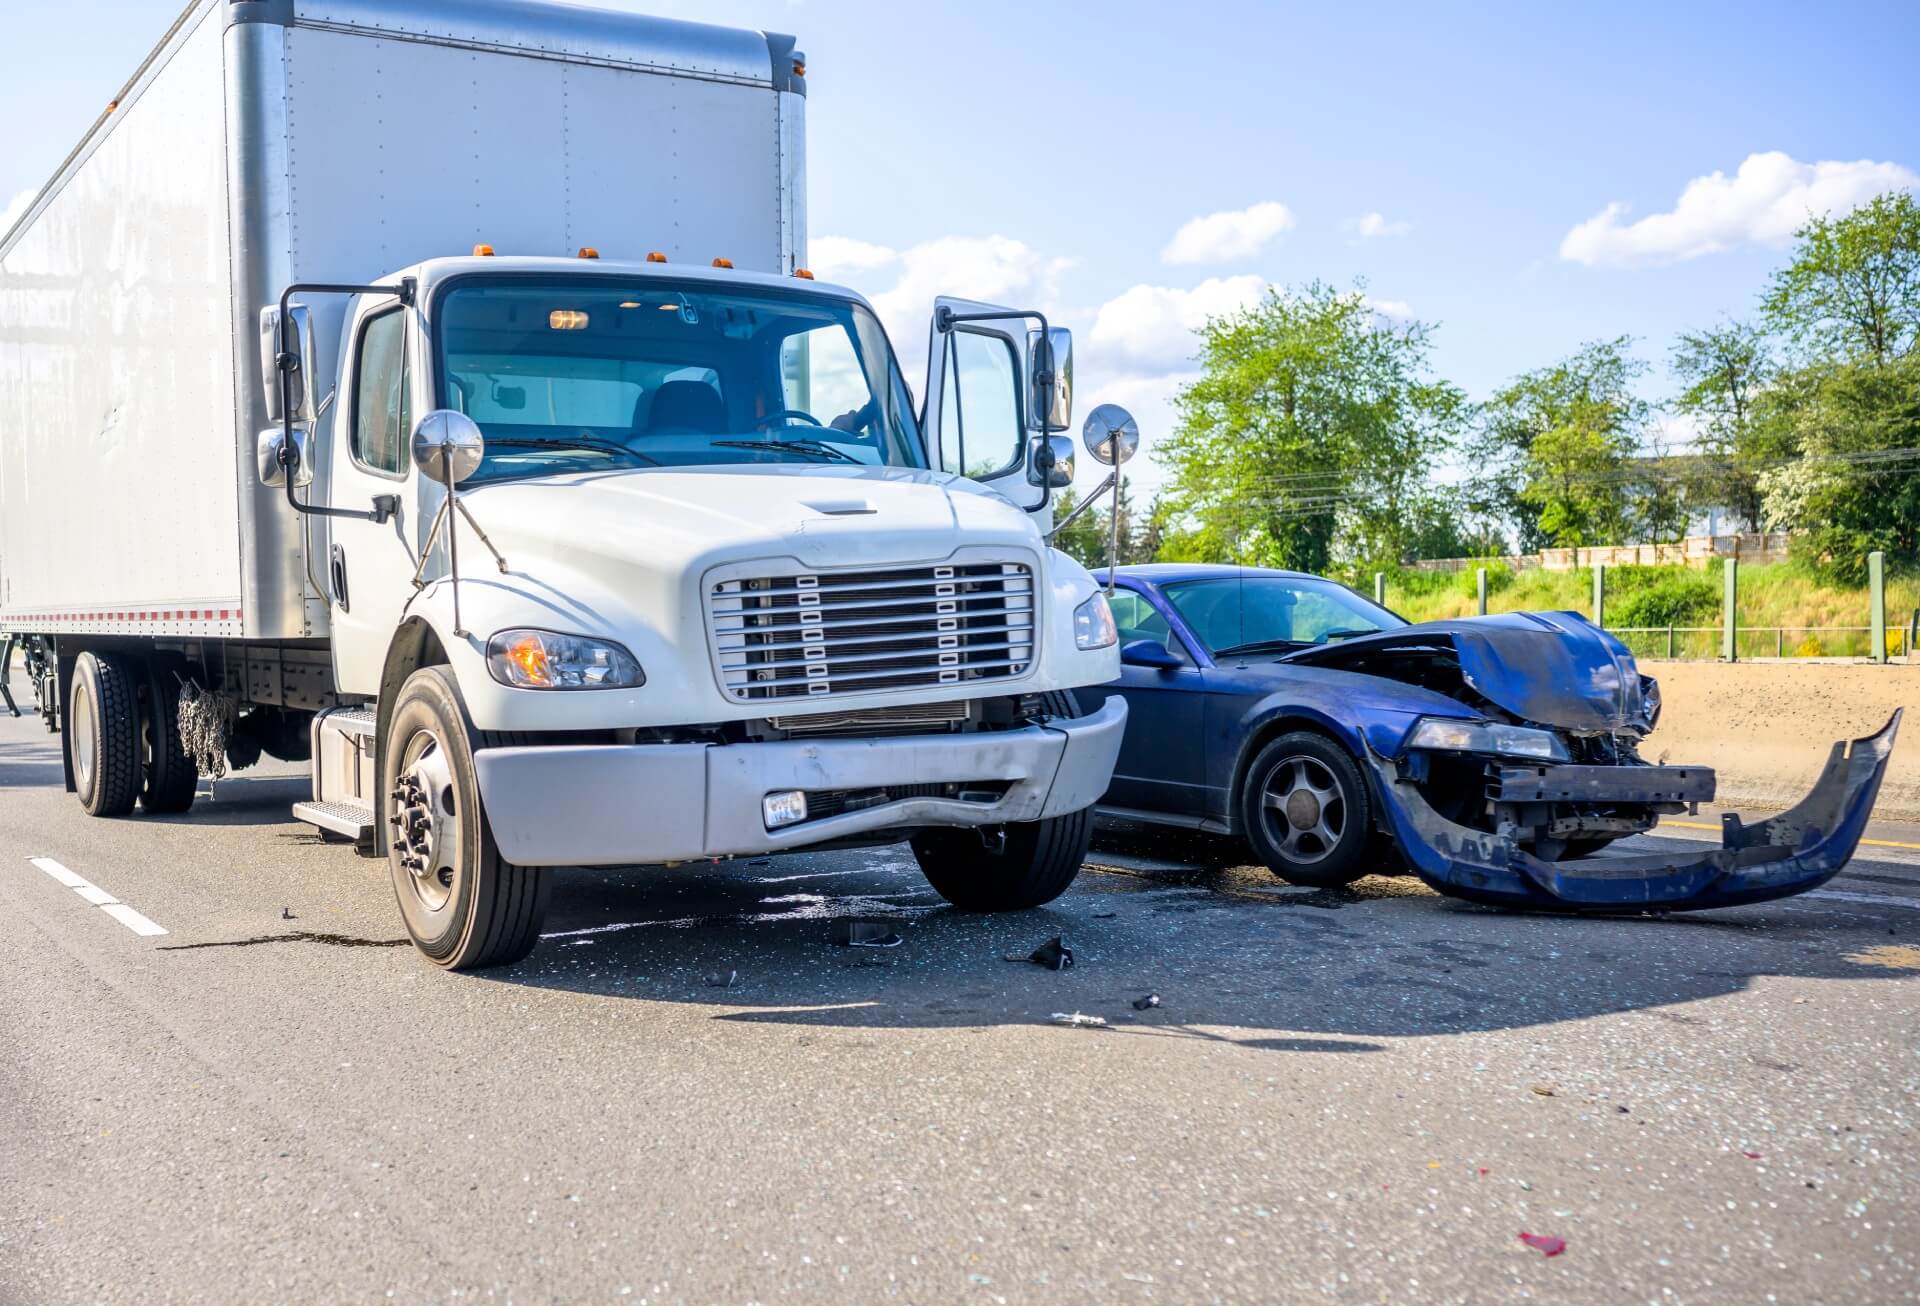 What Are The Common Causes of Truck Accidents?